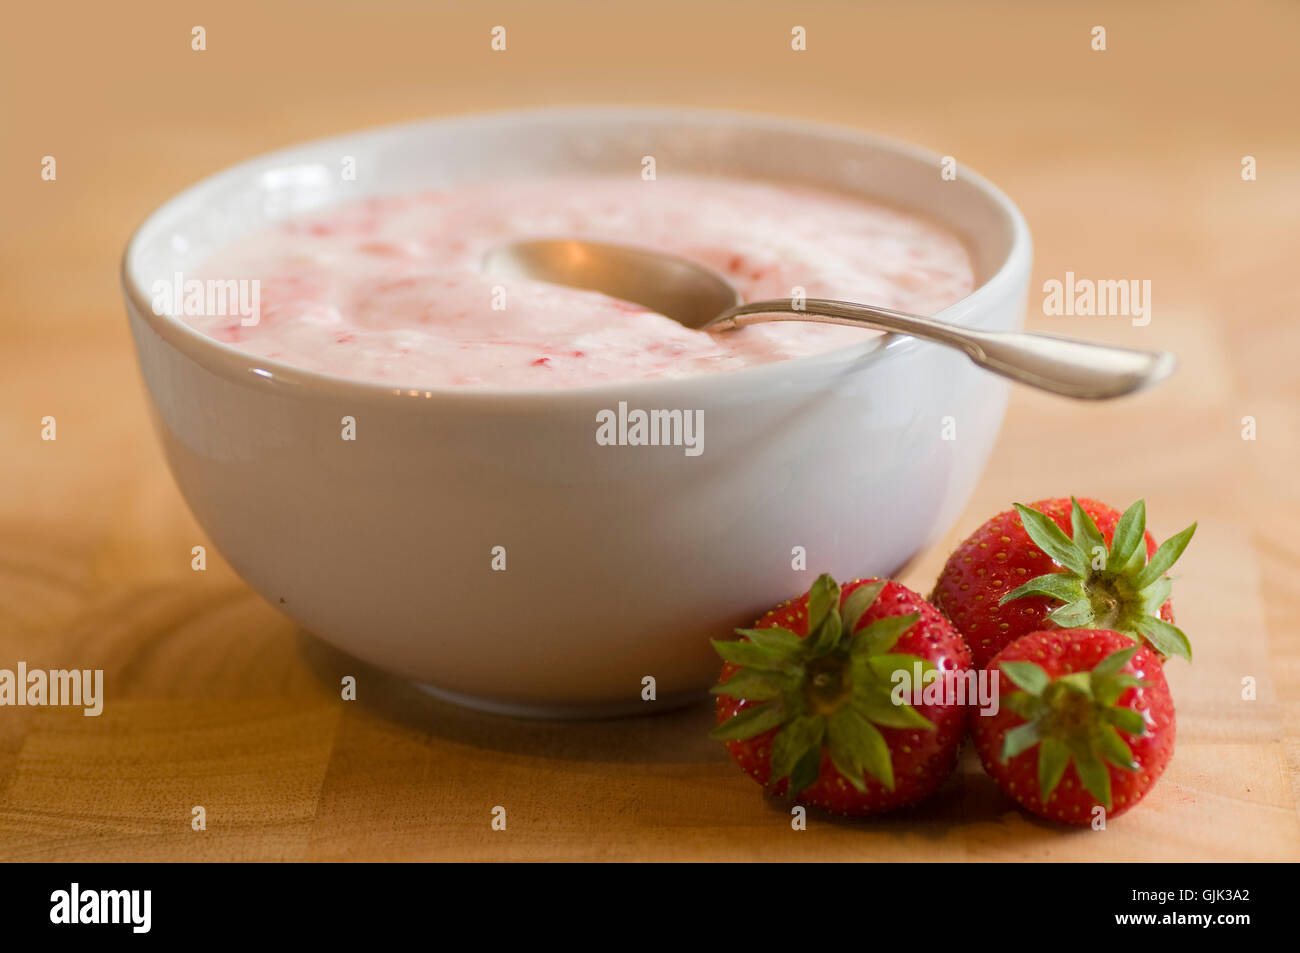 curd curds junket Stock Photo